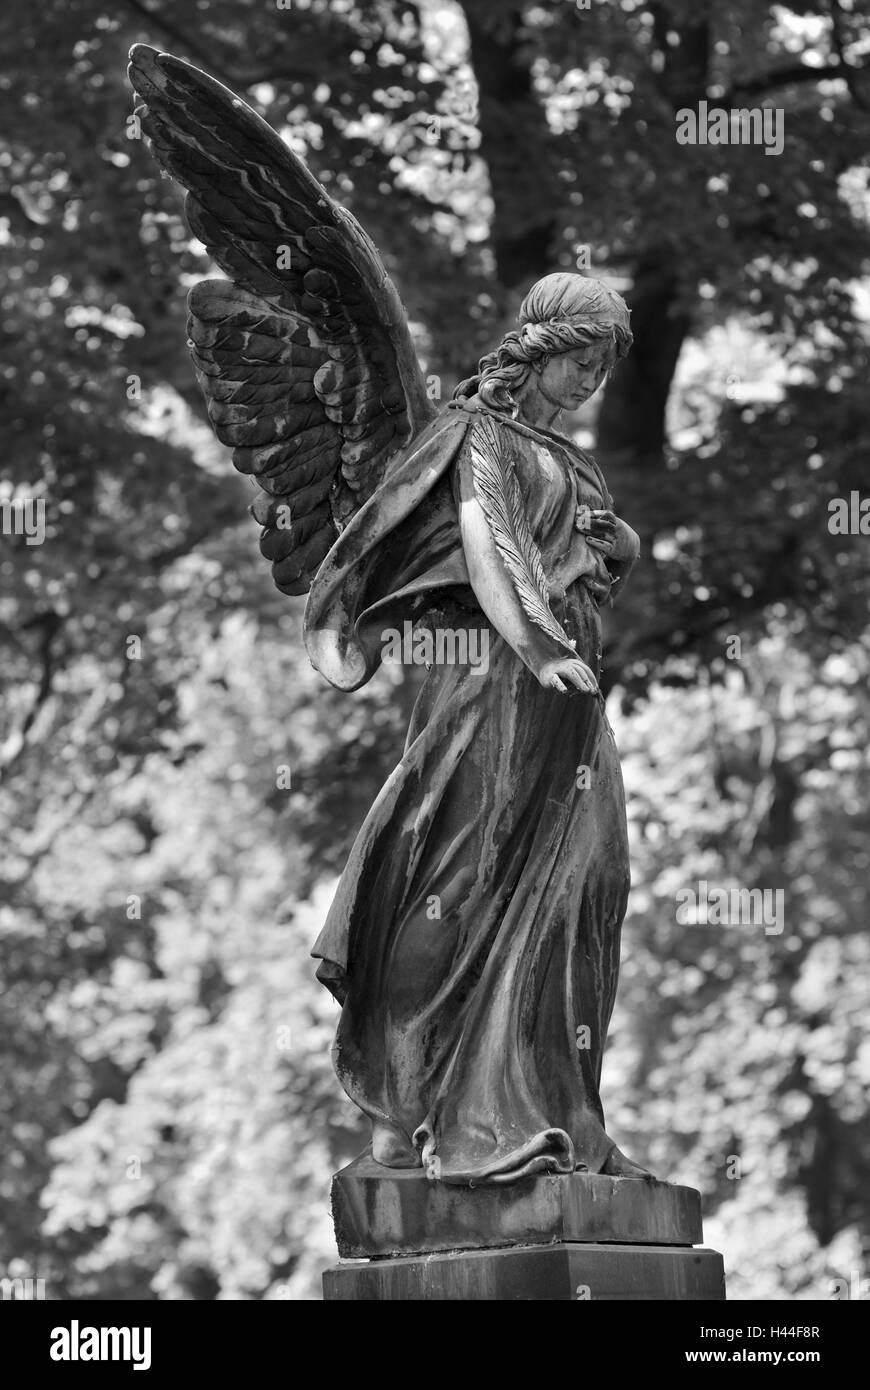 Engel, statue, head, wing, tree, branches, leaves, b/w, Stock Photo